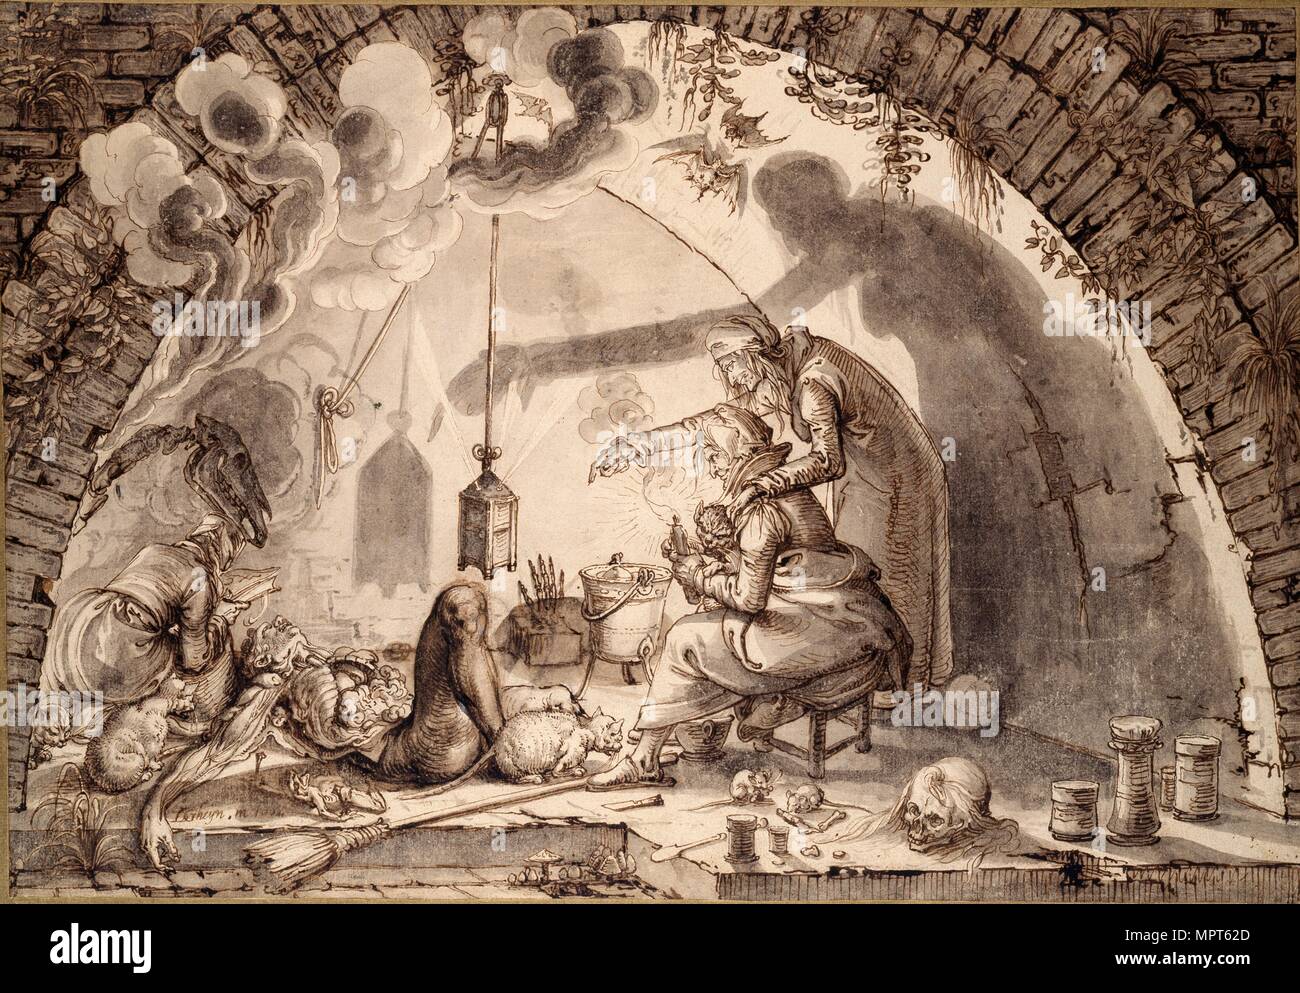 A Witches' Kitchen, c1600. Artist: Jacques de Gheyn II. Stock Photo